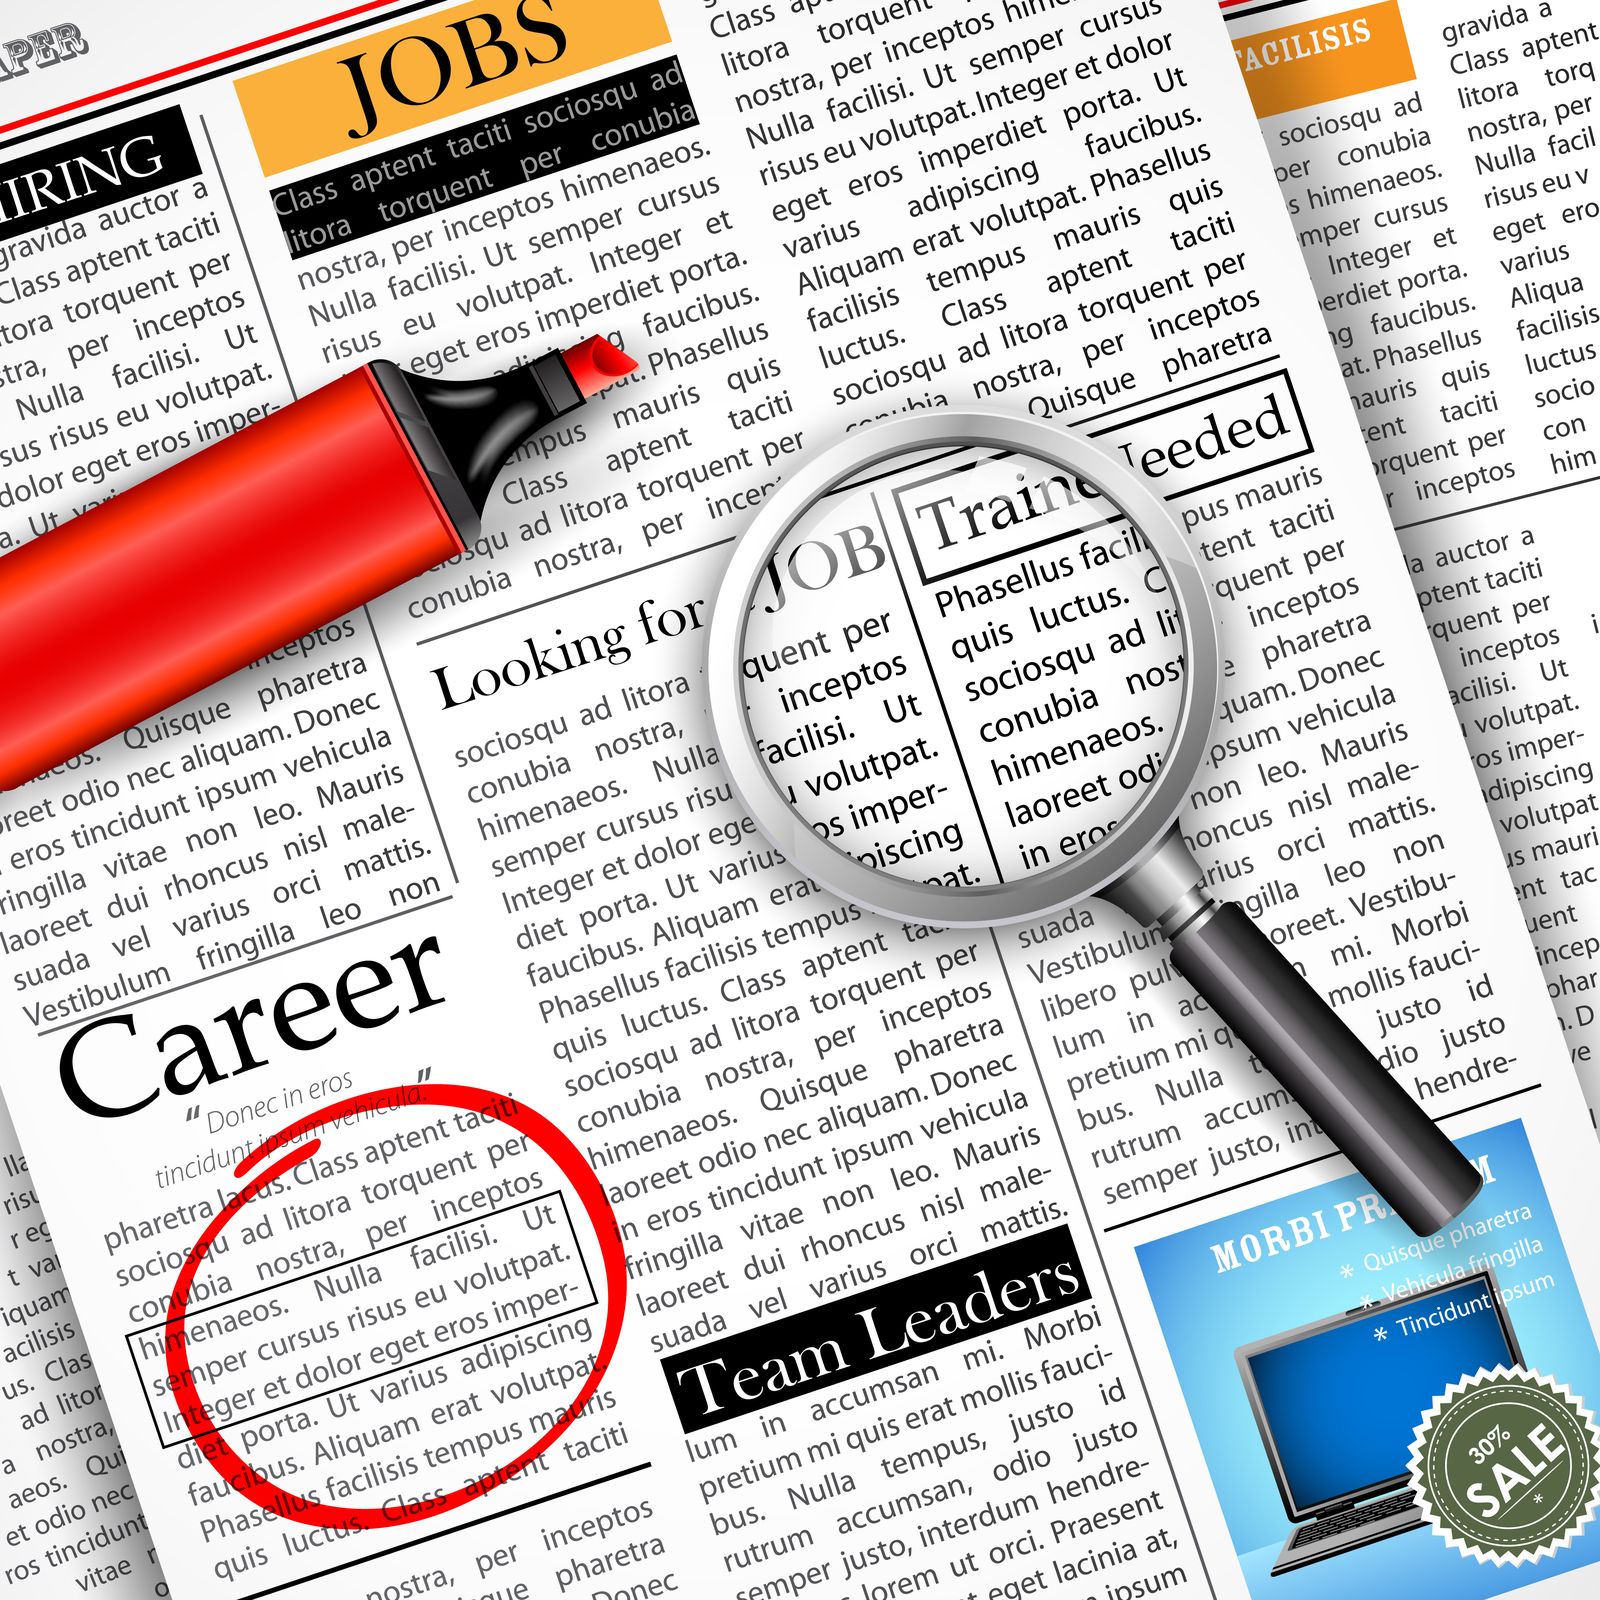 Investor Information Portal Launches Jobs Board for Cryptocurrency Industry